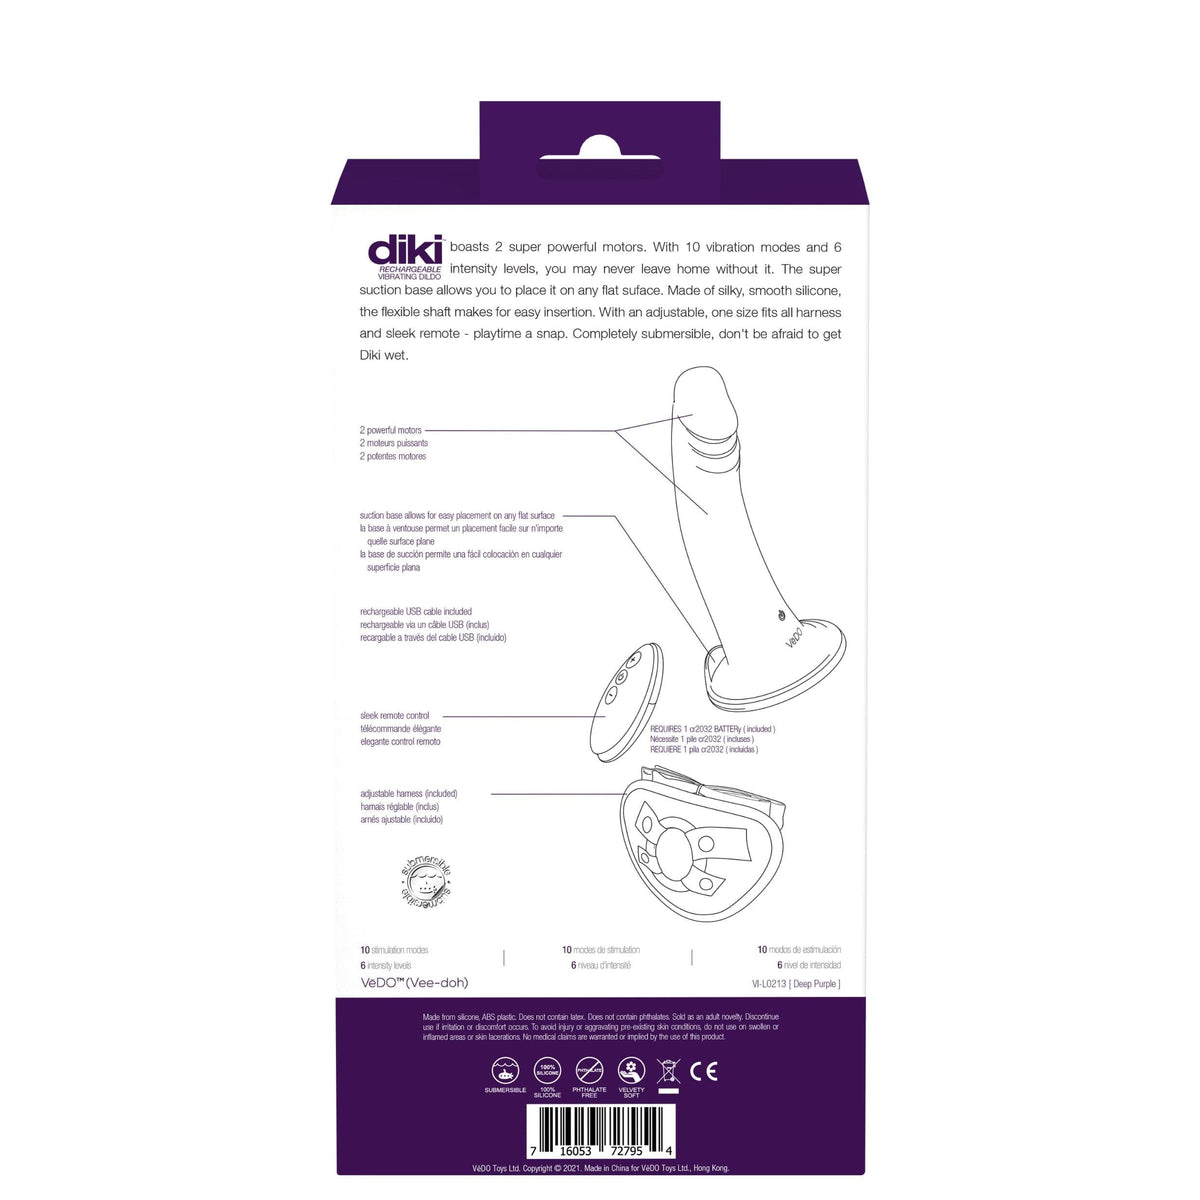 diki rechargeable vibrating dildo with harness deep purple